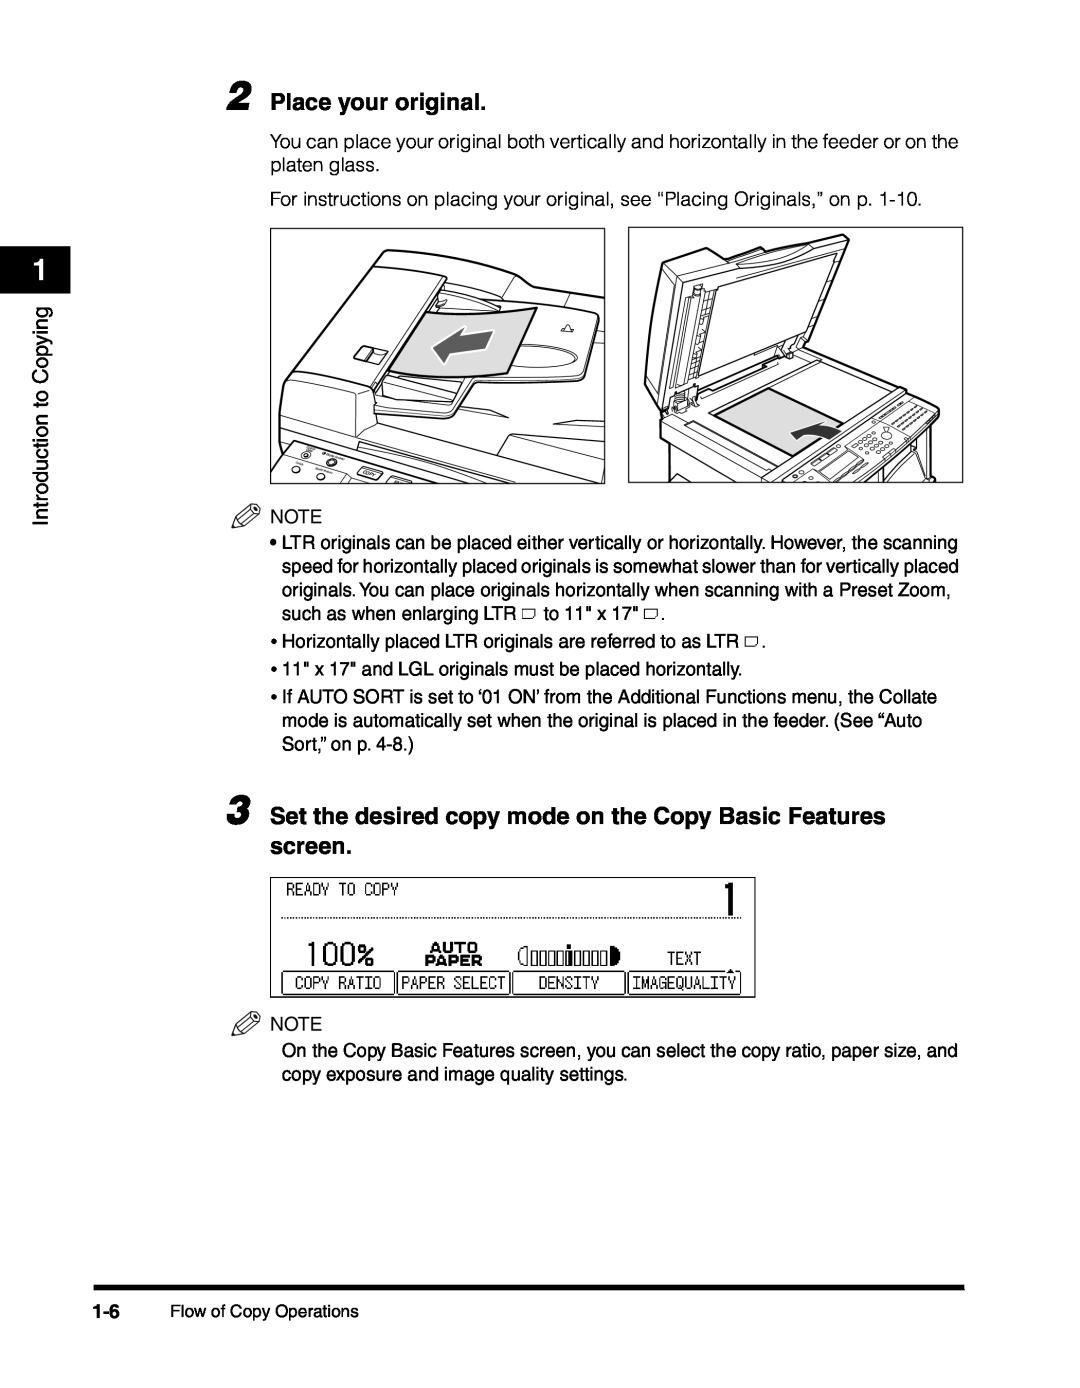 Canon 2010F Place your original, Set the desired copy mode on the Copy Basic Features screen, Introduction to Copying 